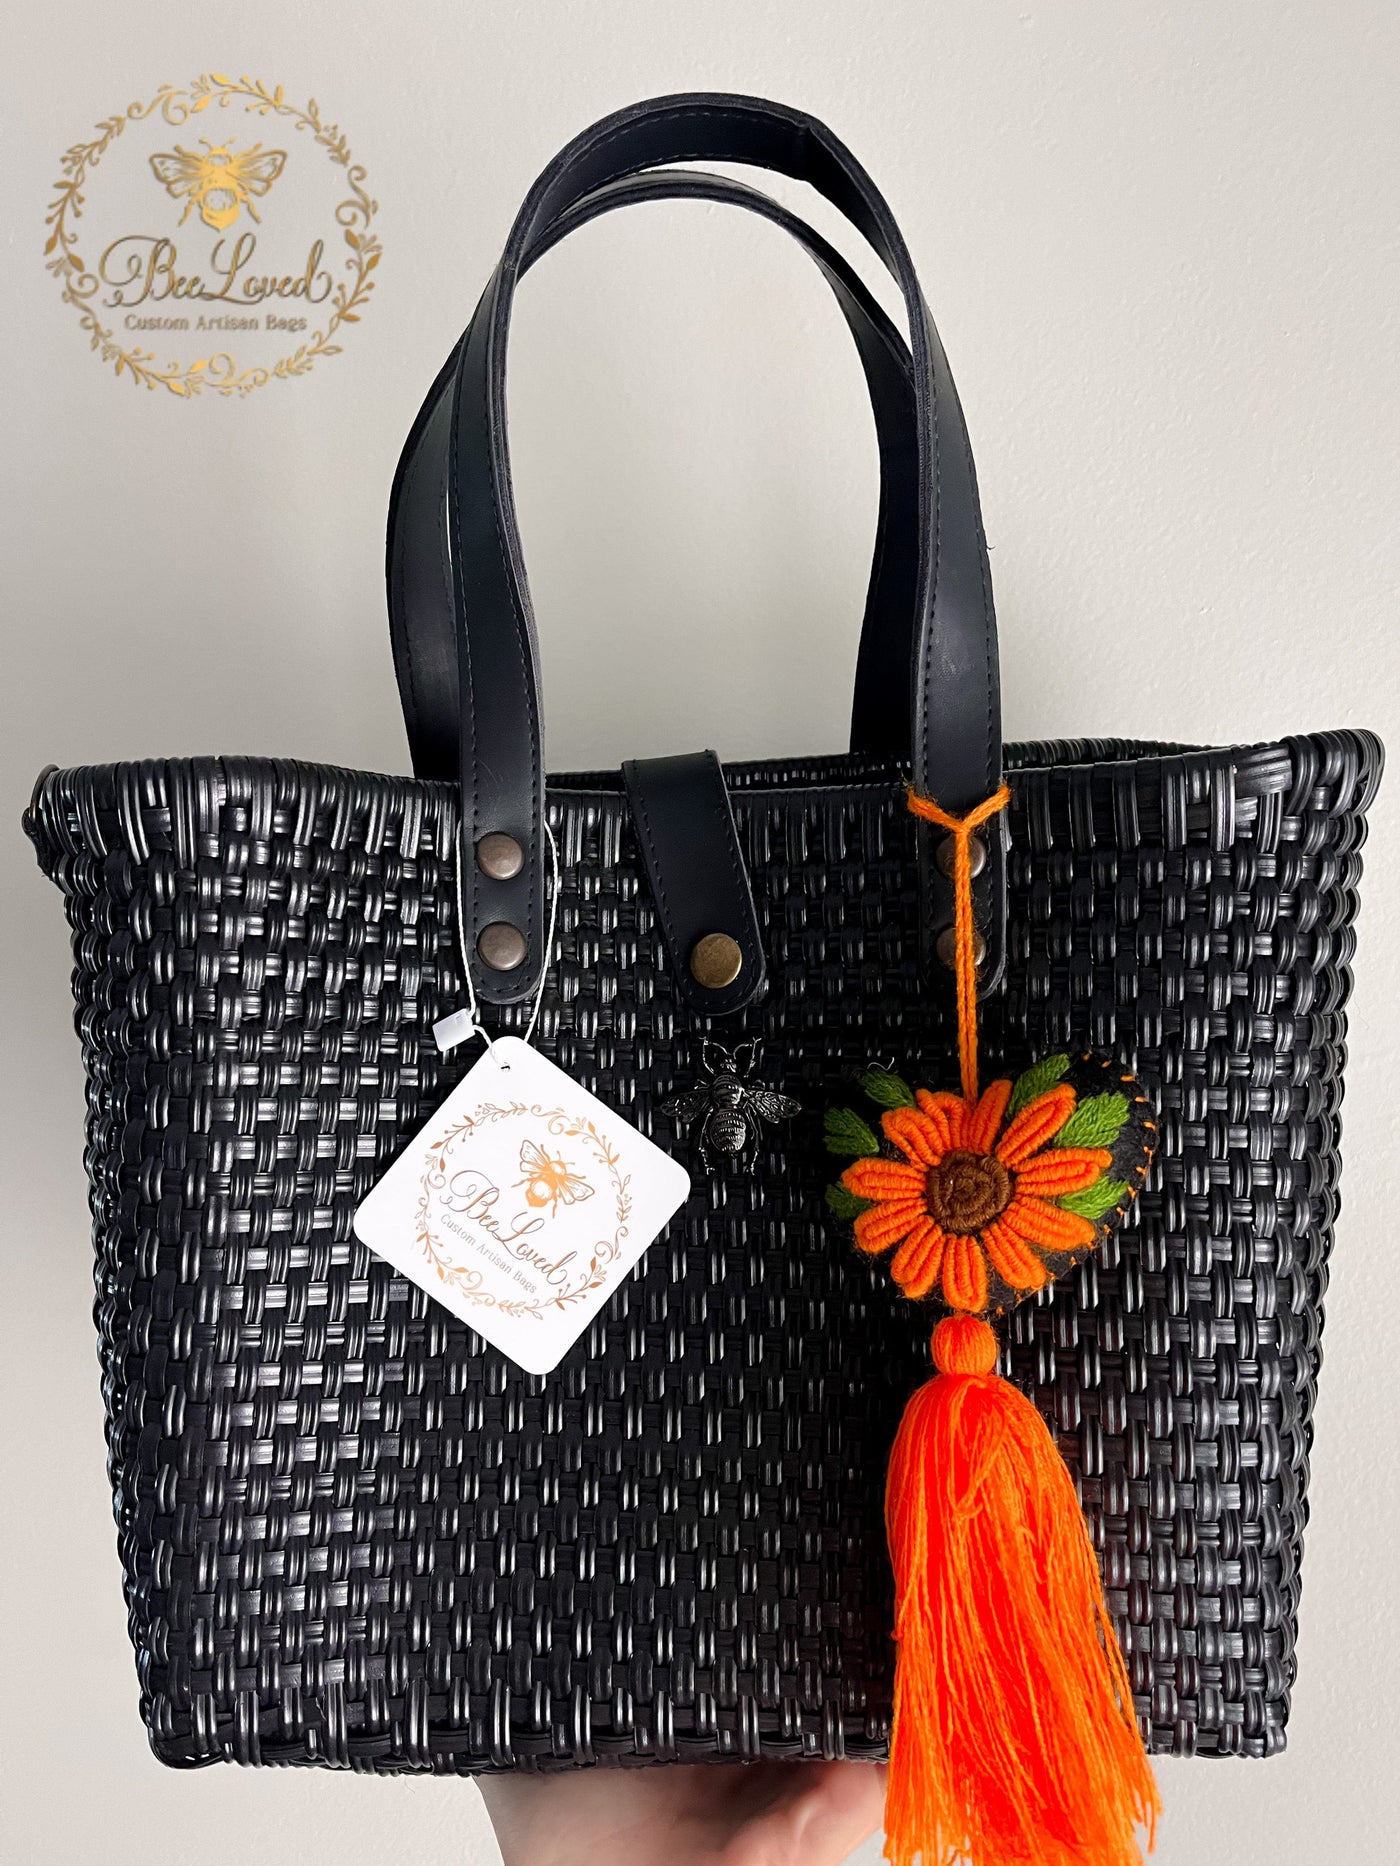 BeeLoved Custom Artisan Bags and Gifts Handbags Black Out Tote